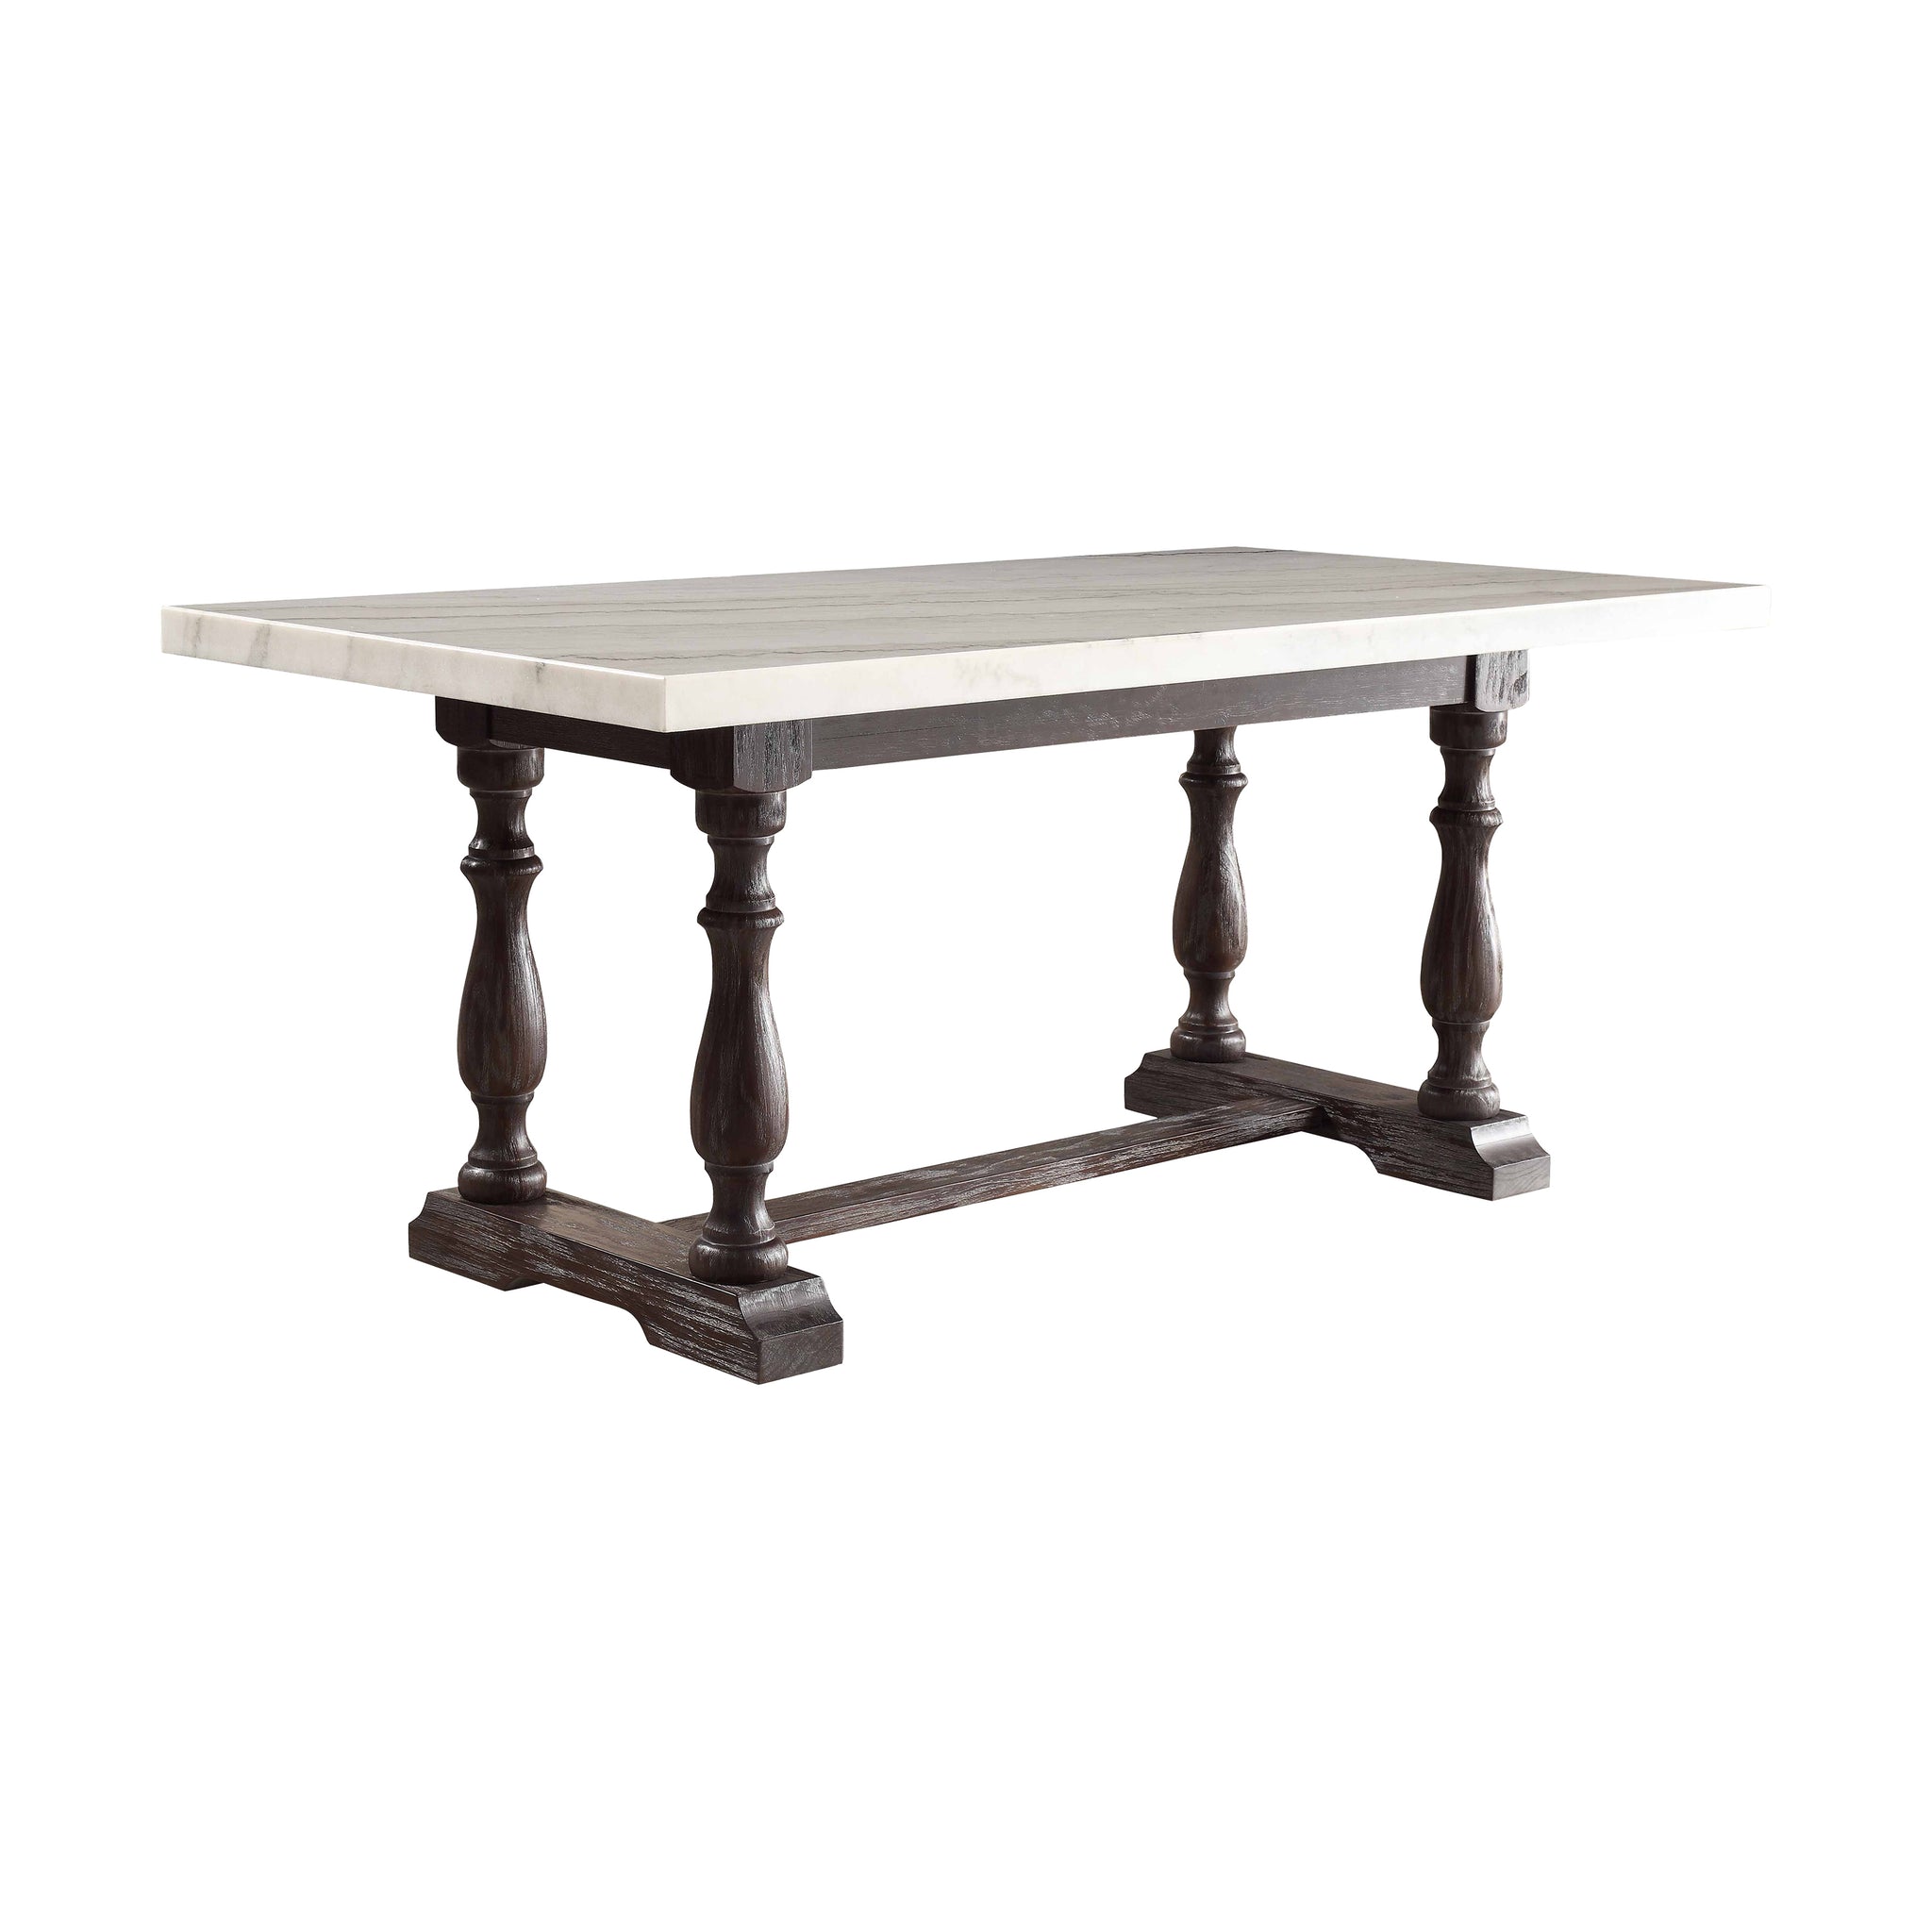 White Marble Weathered Espresso Wood Dining Table - Team Spirit Store USA 